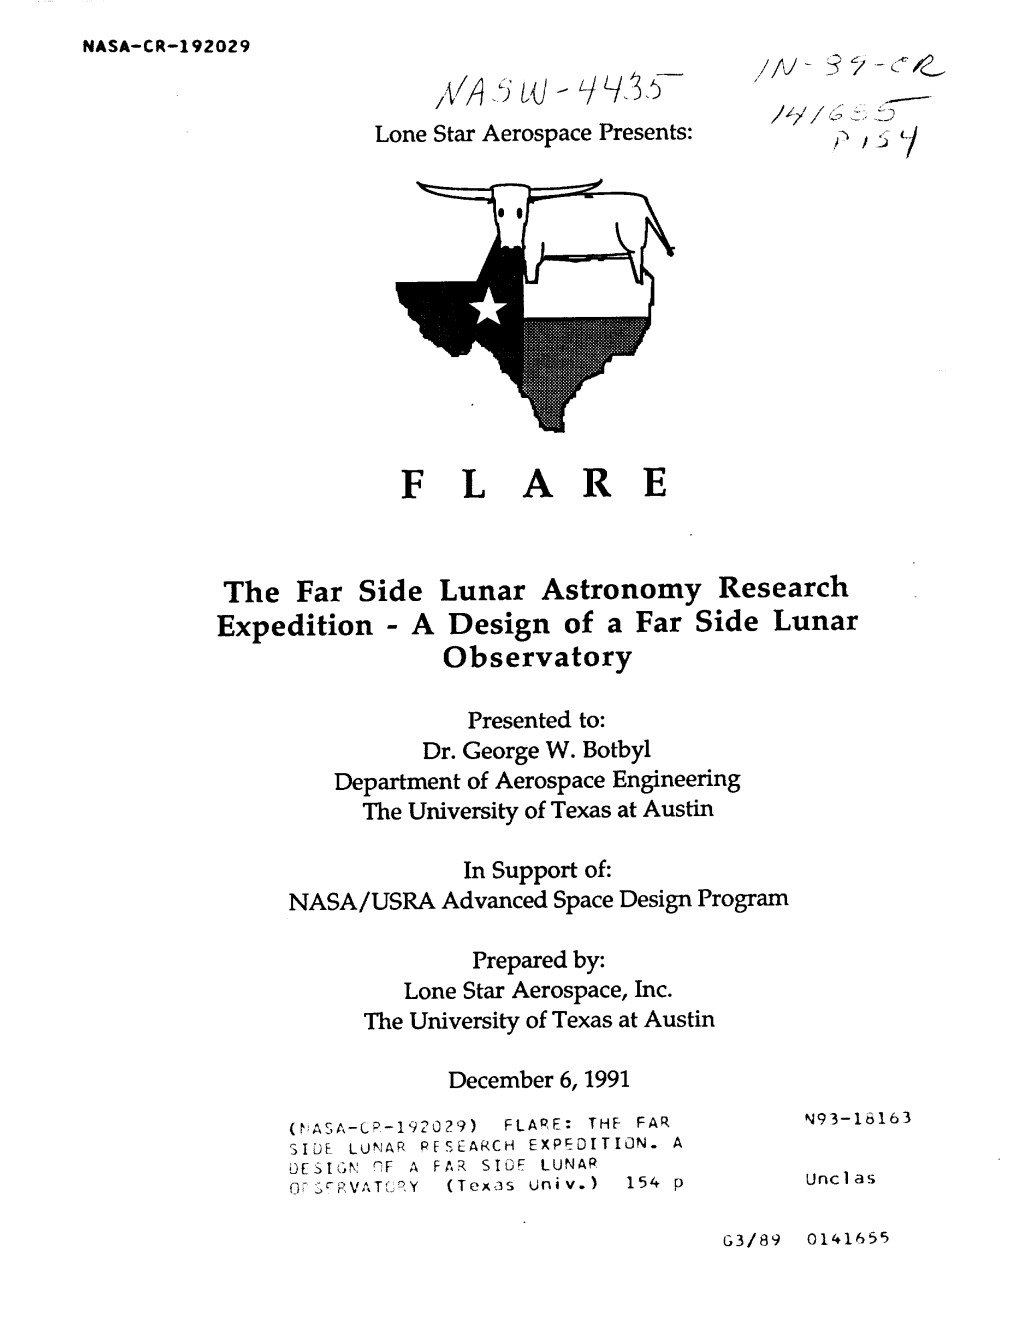 The Far Side Lunar Astronomy Research Expedition - a Design of a Far Side Lunar Observatory